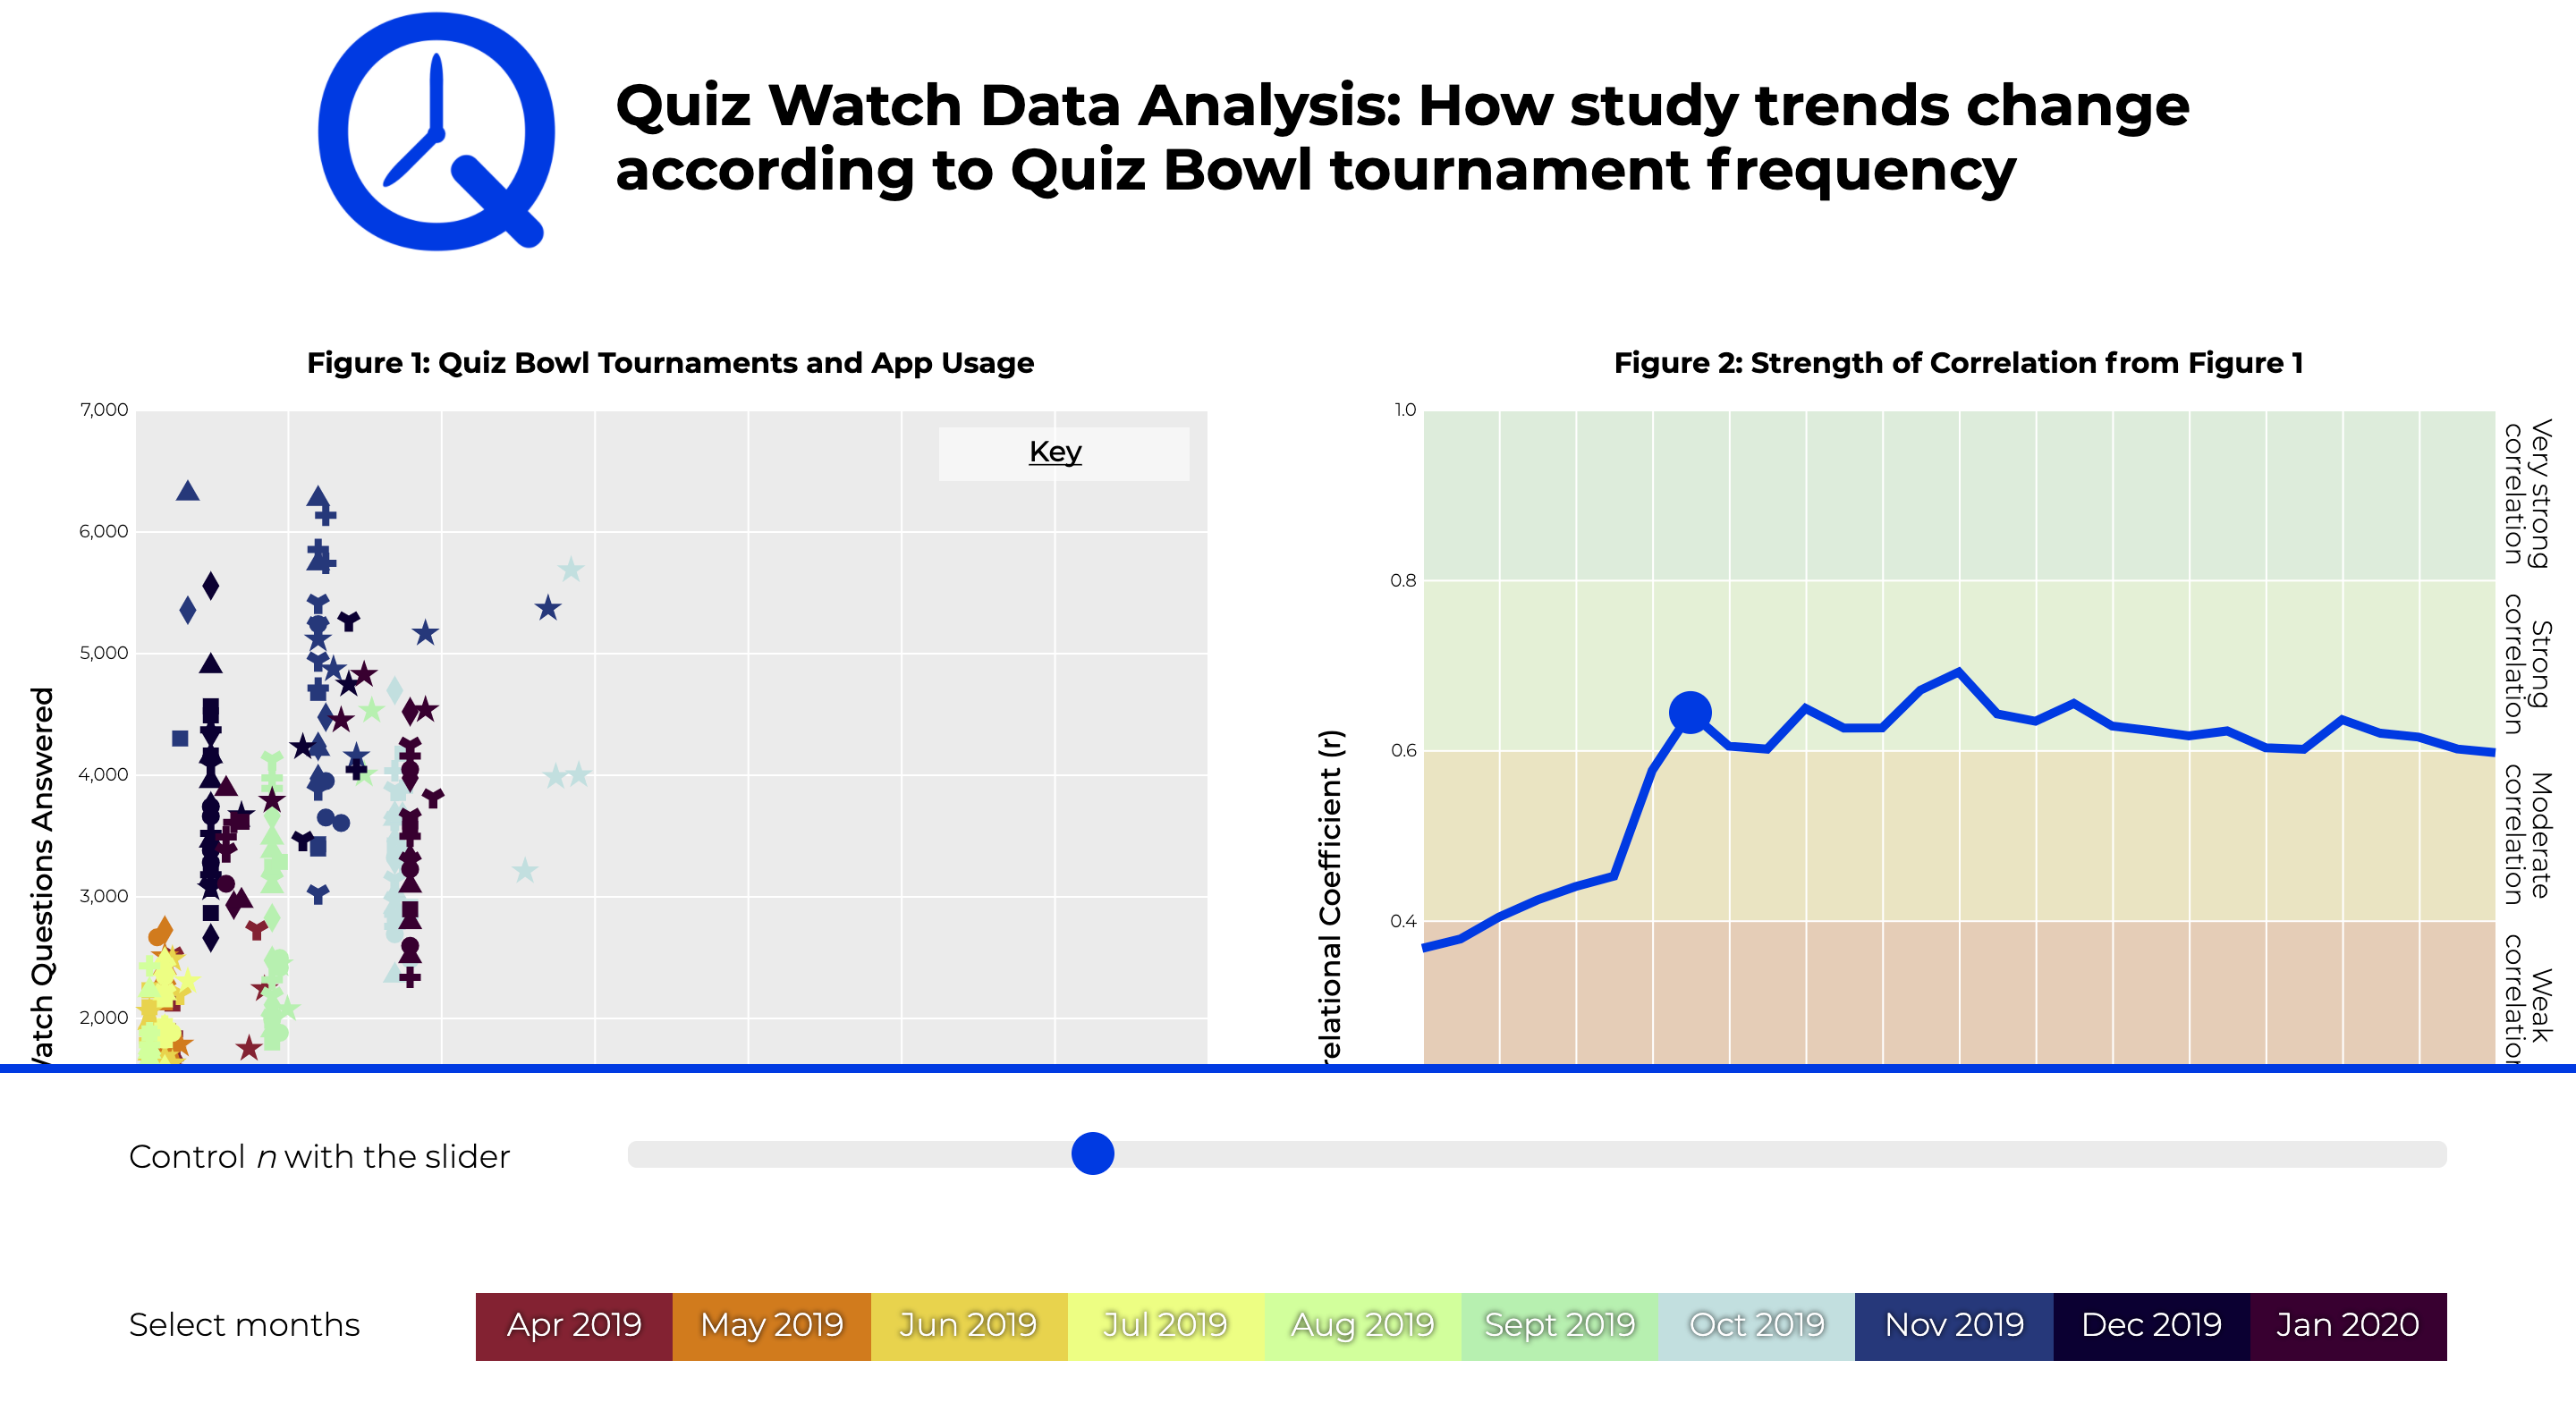 Data analysis web page for the Quiz Watch app